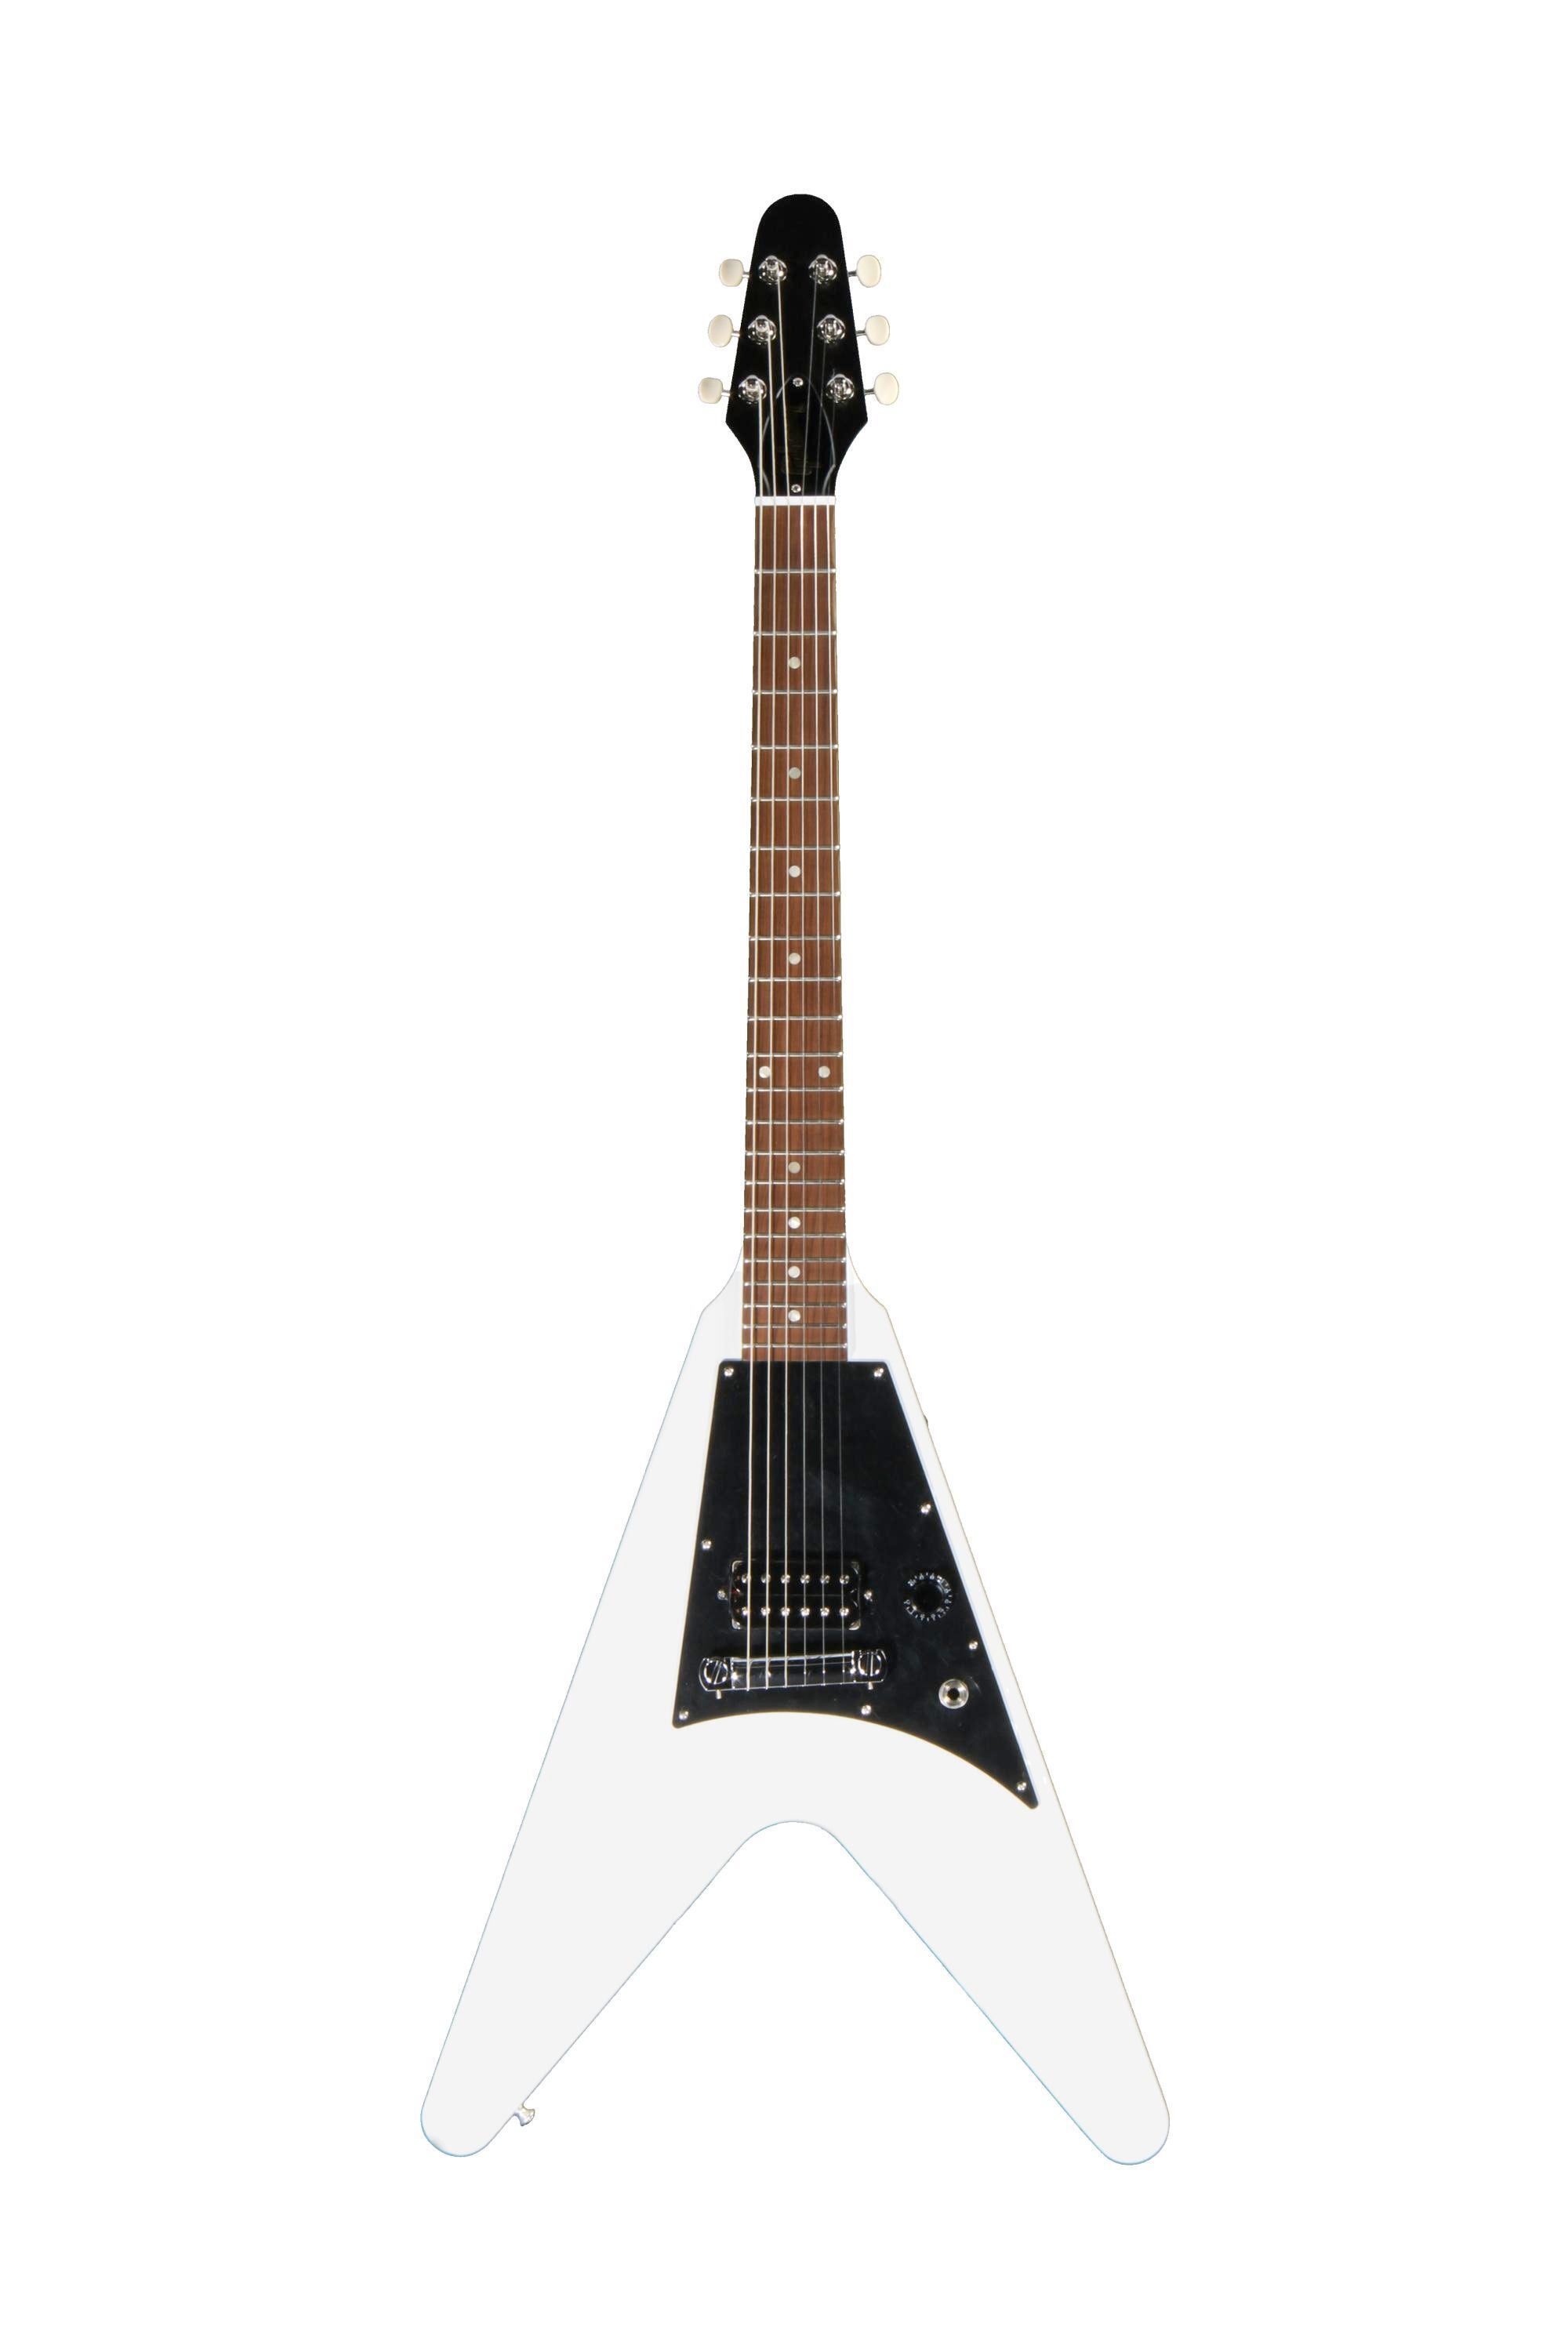 Gibson Flying V Melody Maker - Satin White | Sweetwater